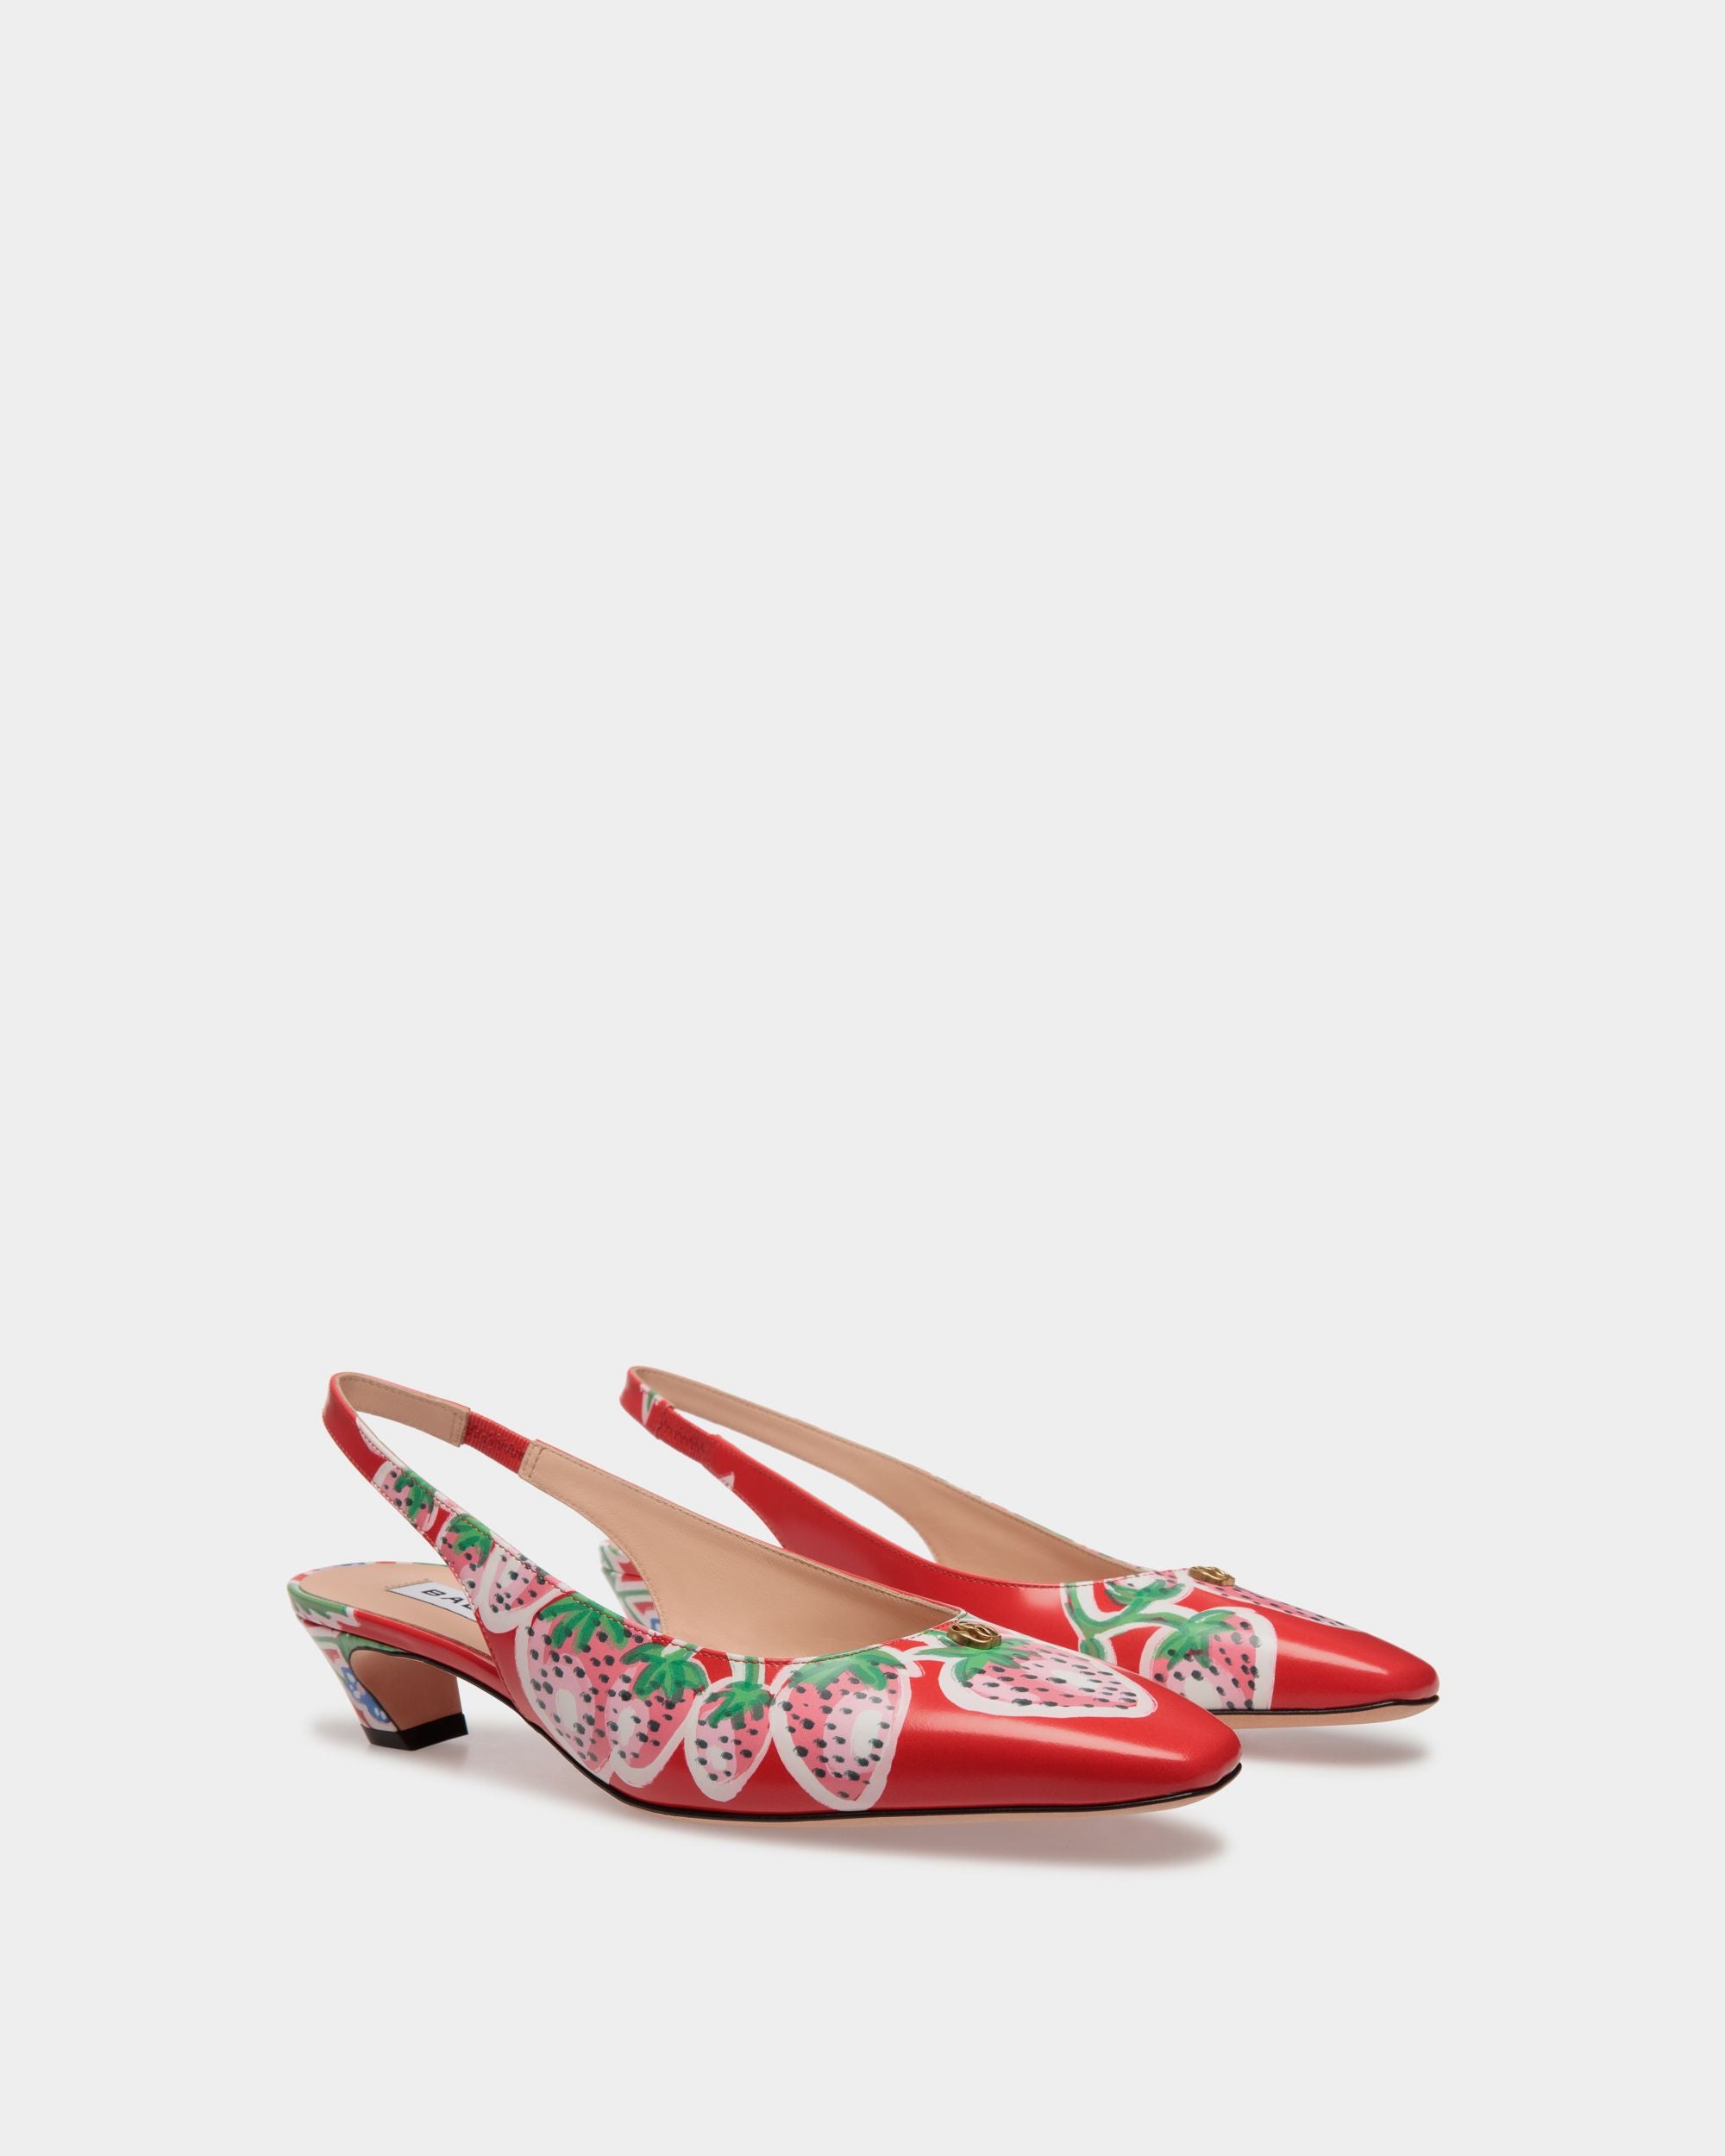 Sylt | Women's Slingback Pump in Strawberry Print Brushed Leather | Bally | Still Life 3/4 Front